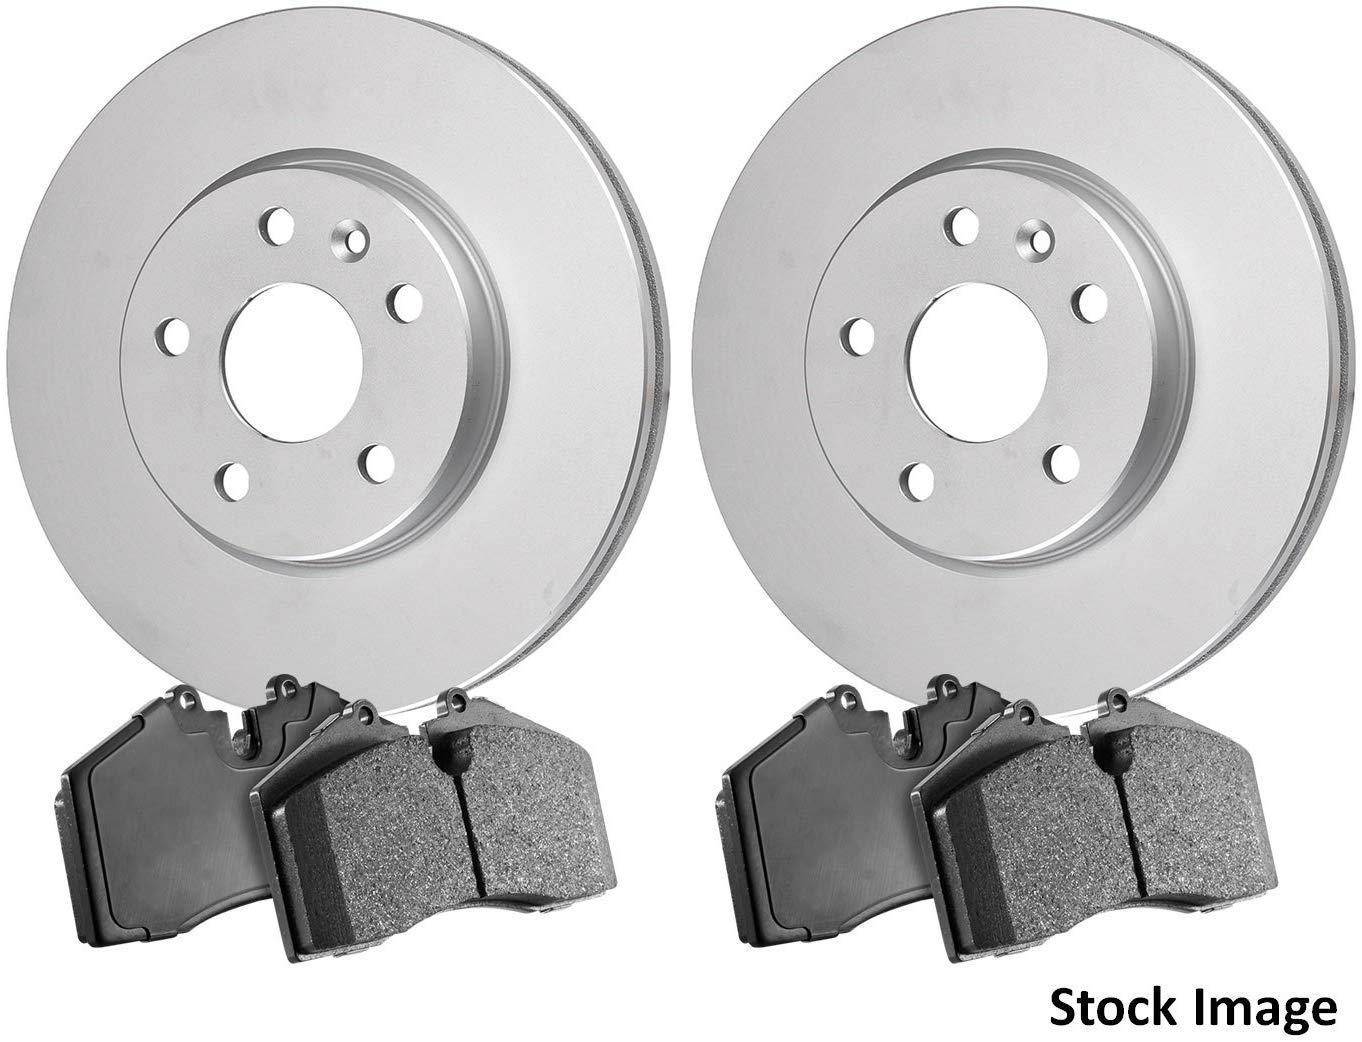 2017 for Hyundai Tucson (NOTE: GAS) Rear Premium Quality Anti Rust Coated Disc Brake Rotors And Ceramic Brake Pads - (For Both Left and Right) One Year Warranty